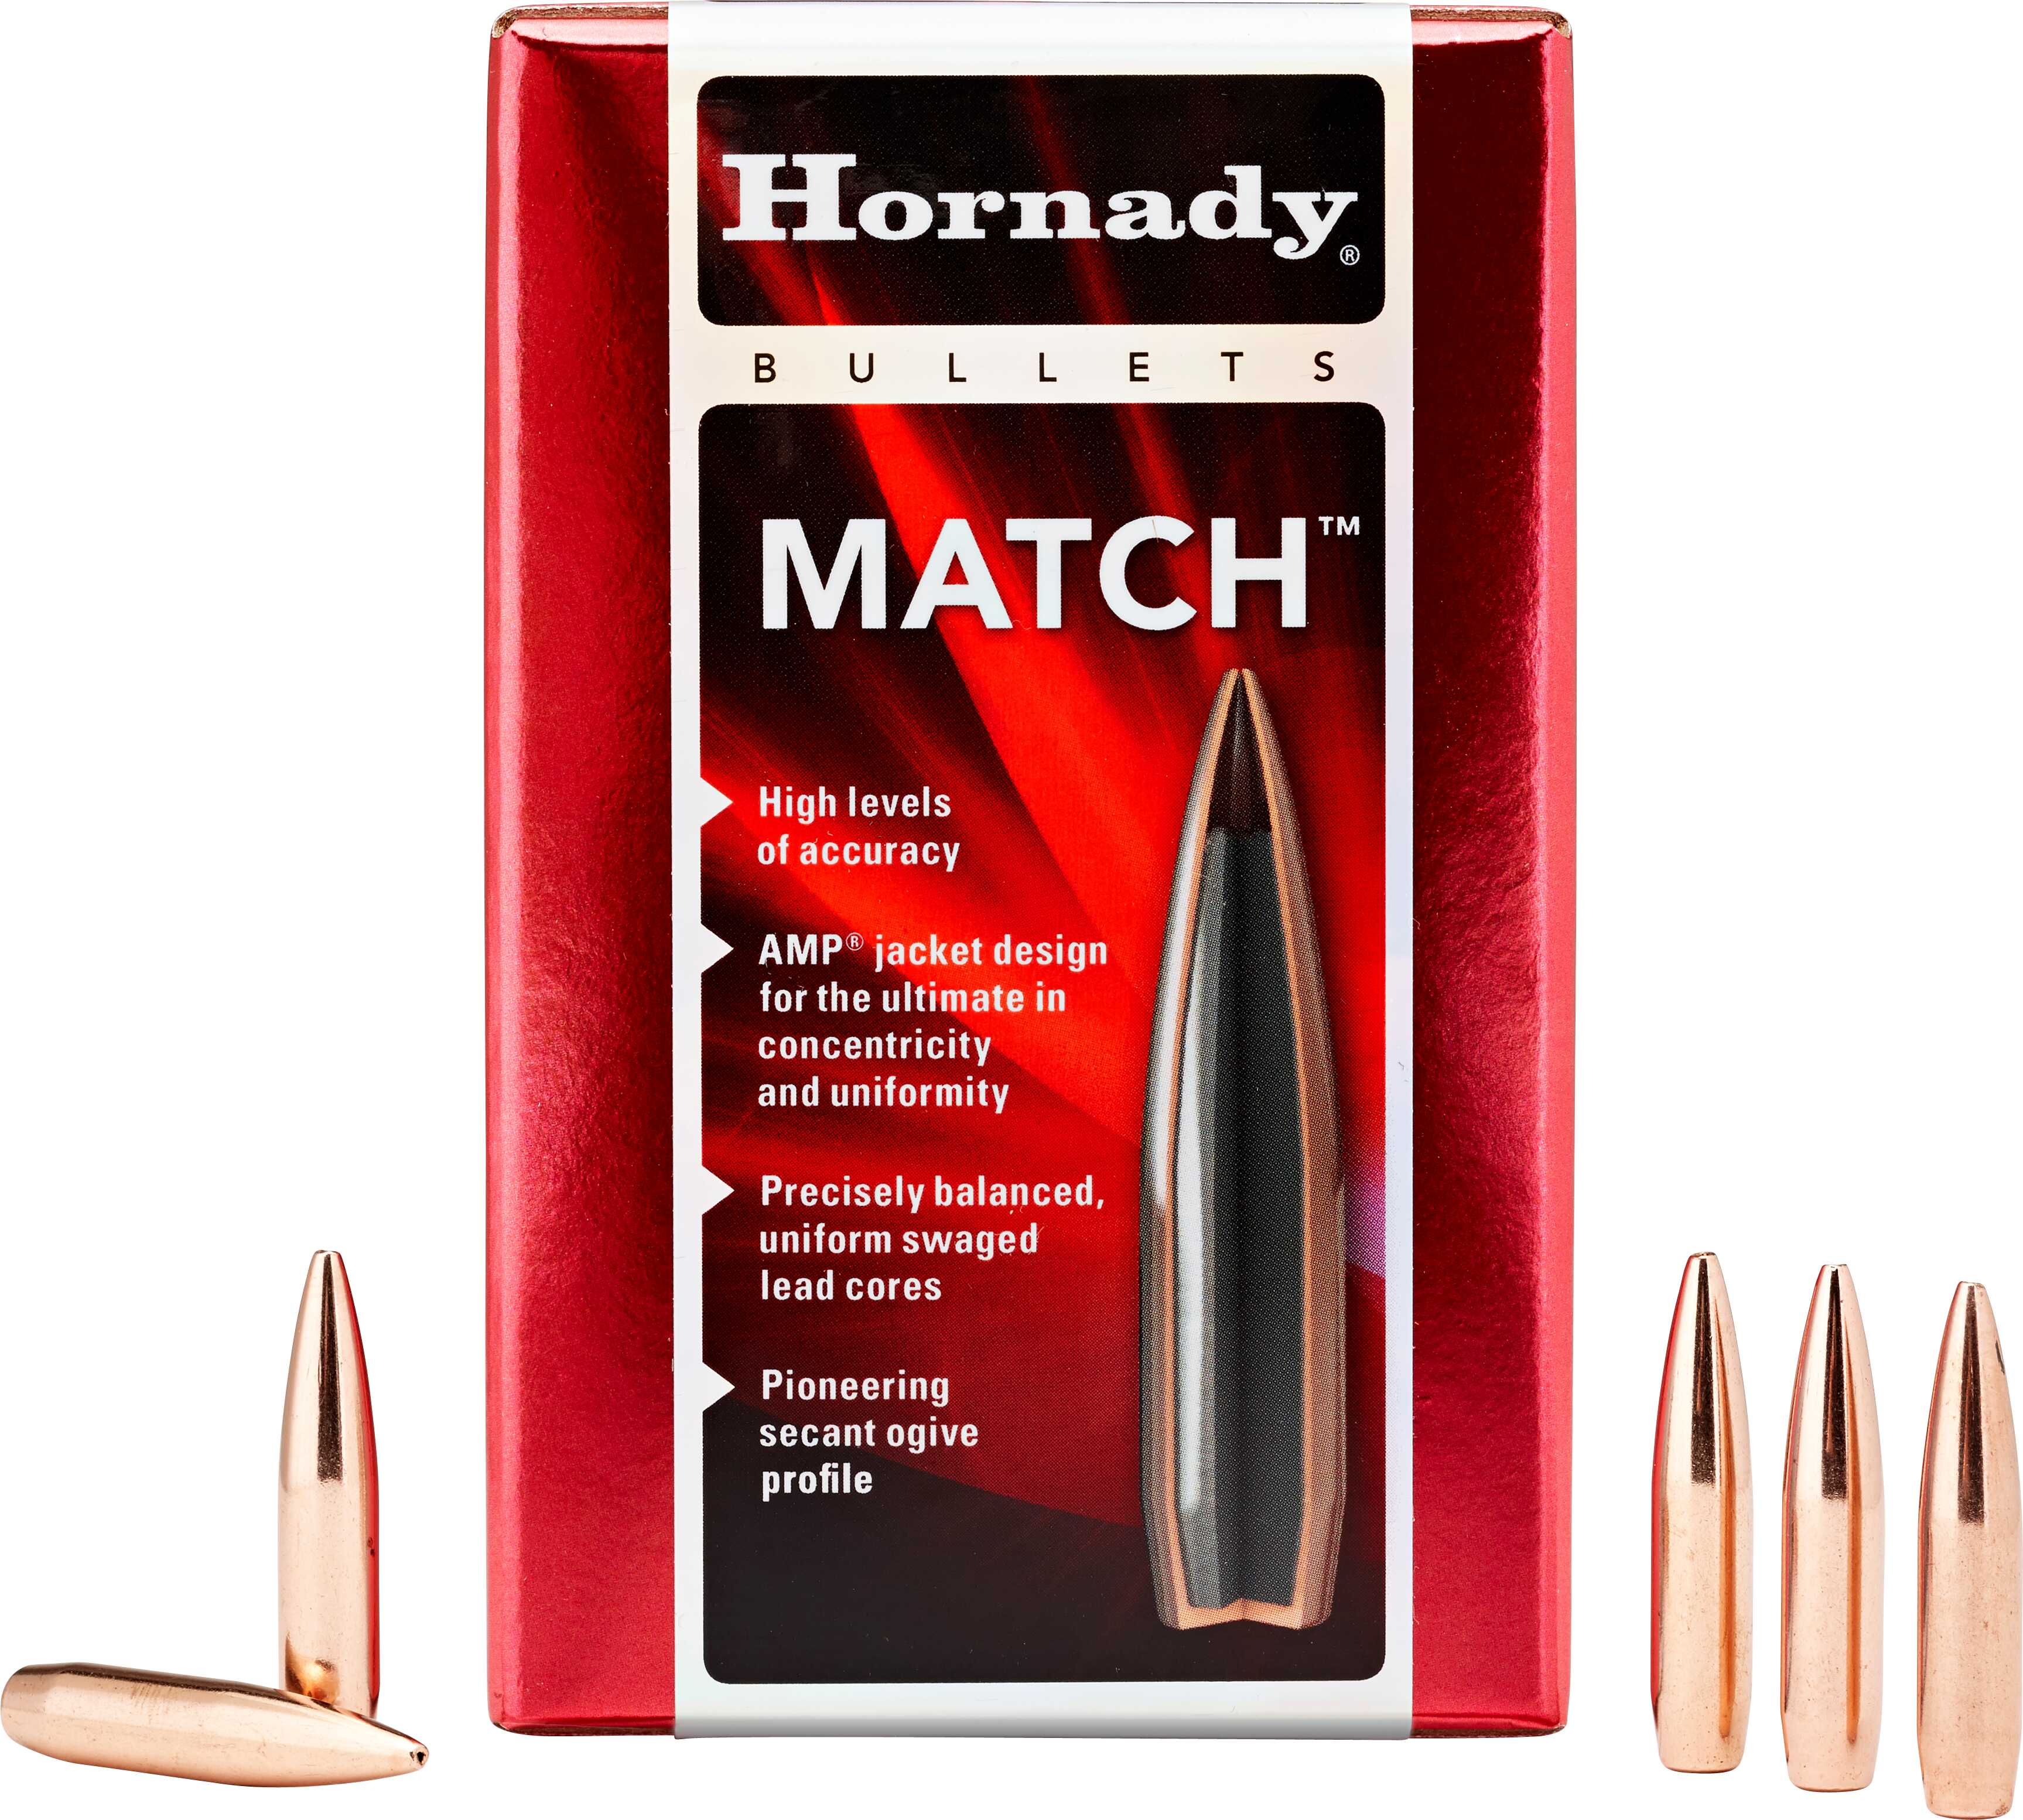 Hornady .224 Caliber 75 Grain Boat Tail Hollow Point 600/Box Md: 22796 Bullets